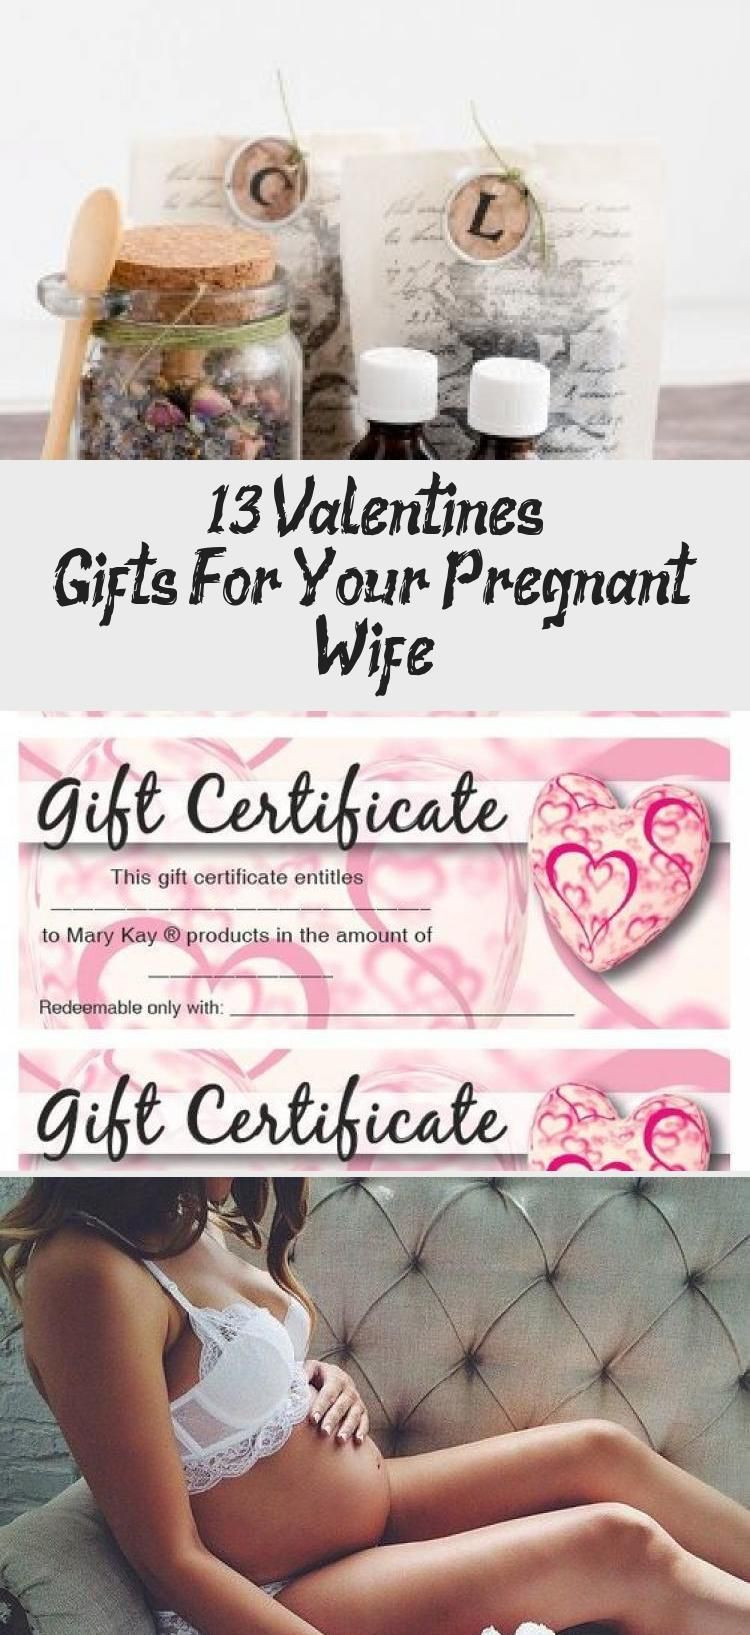 Valentines Gift Ideas For Pregnant Wife
 13 Valentine’s Gifts For Your Pregnant Wife in 2020